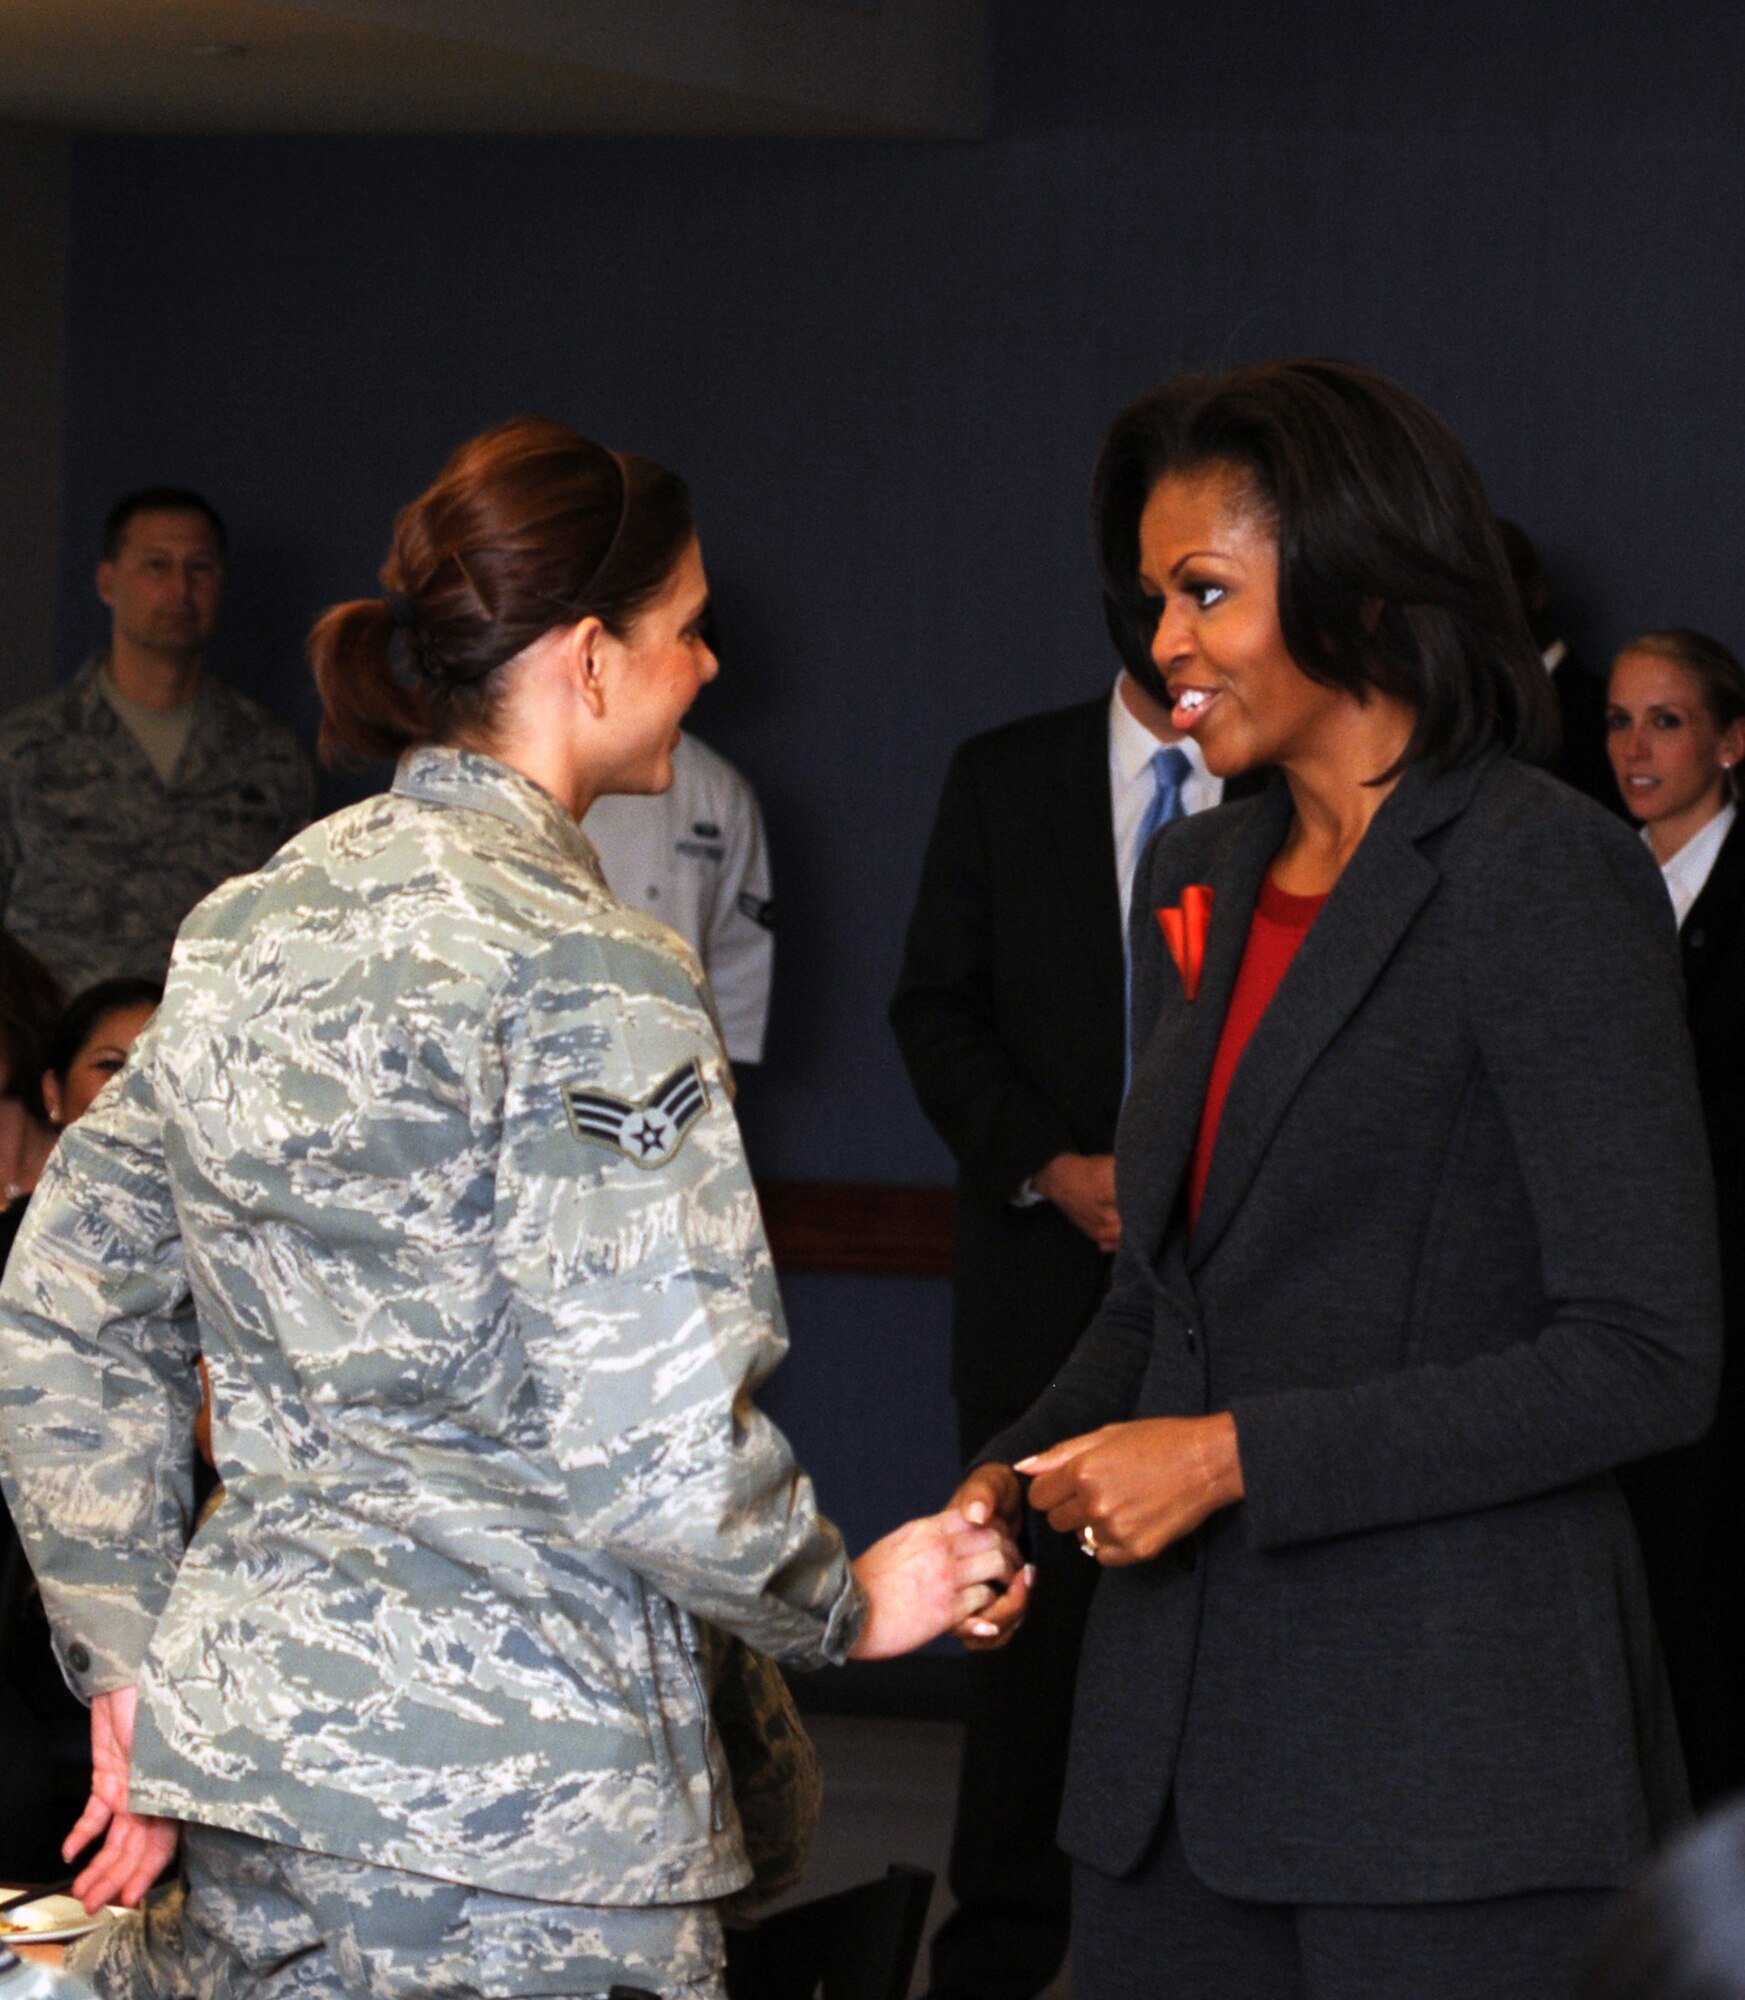 Michelle Obama speaks to an Airman at Little Rock Air Force Base, Ark., Feb. 9, 2012. Little Rock AFB is one of six bases to implement the pilot Food Transformation Initiative program, designed to provide a wider variety of nutritional meals to service members and their families. (U.S. Air Force photo/Airman 1st Class Rusty Frank)